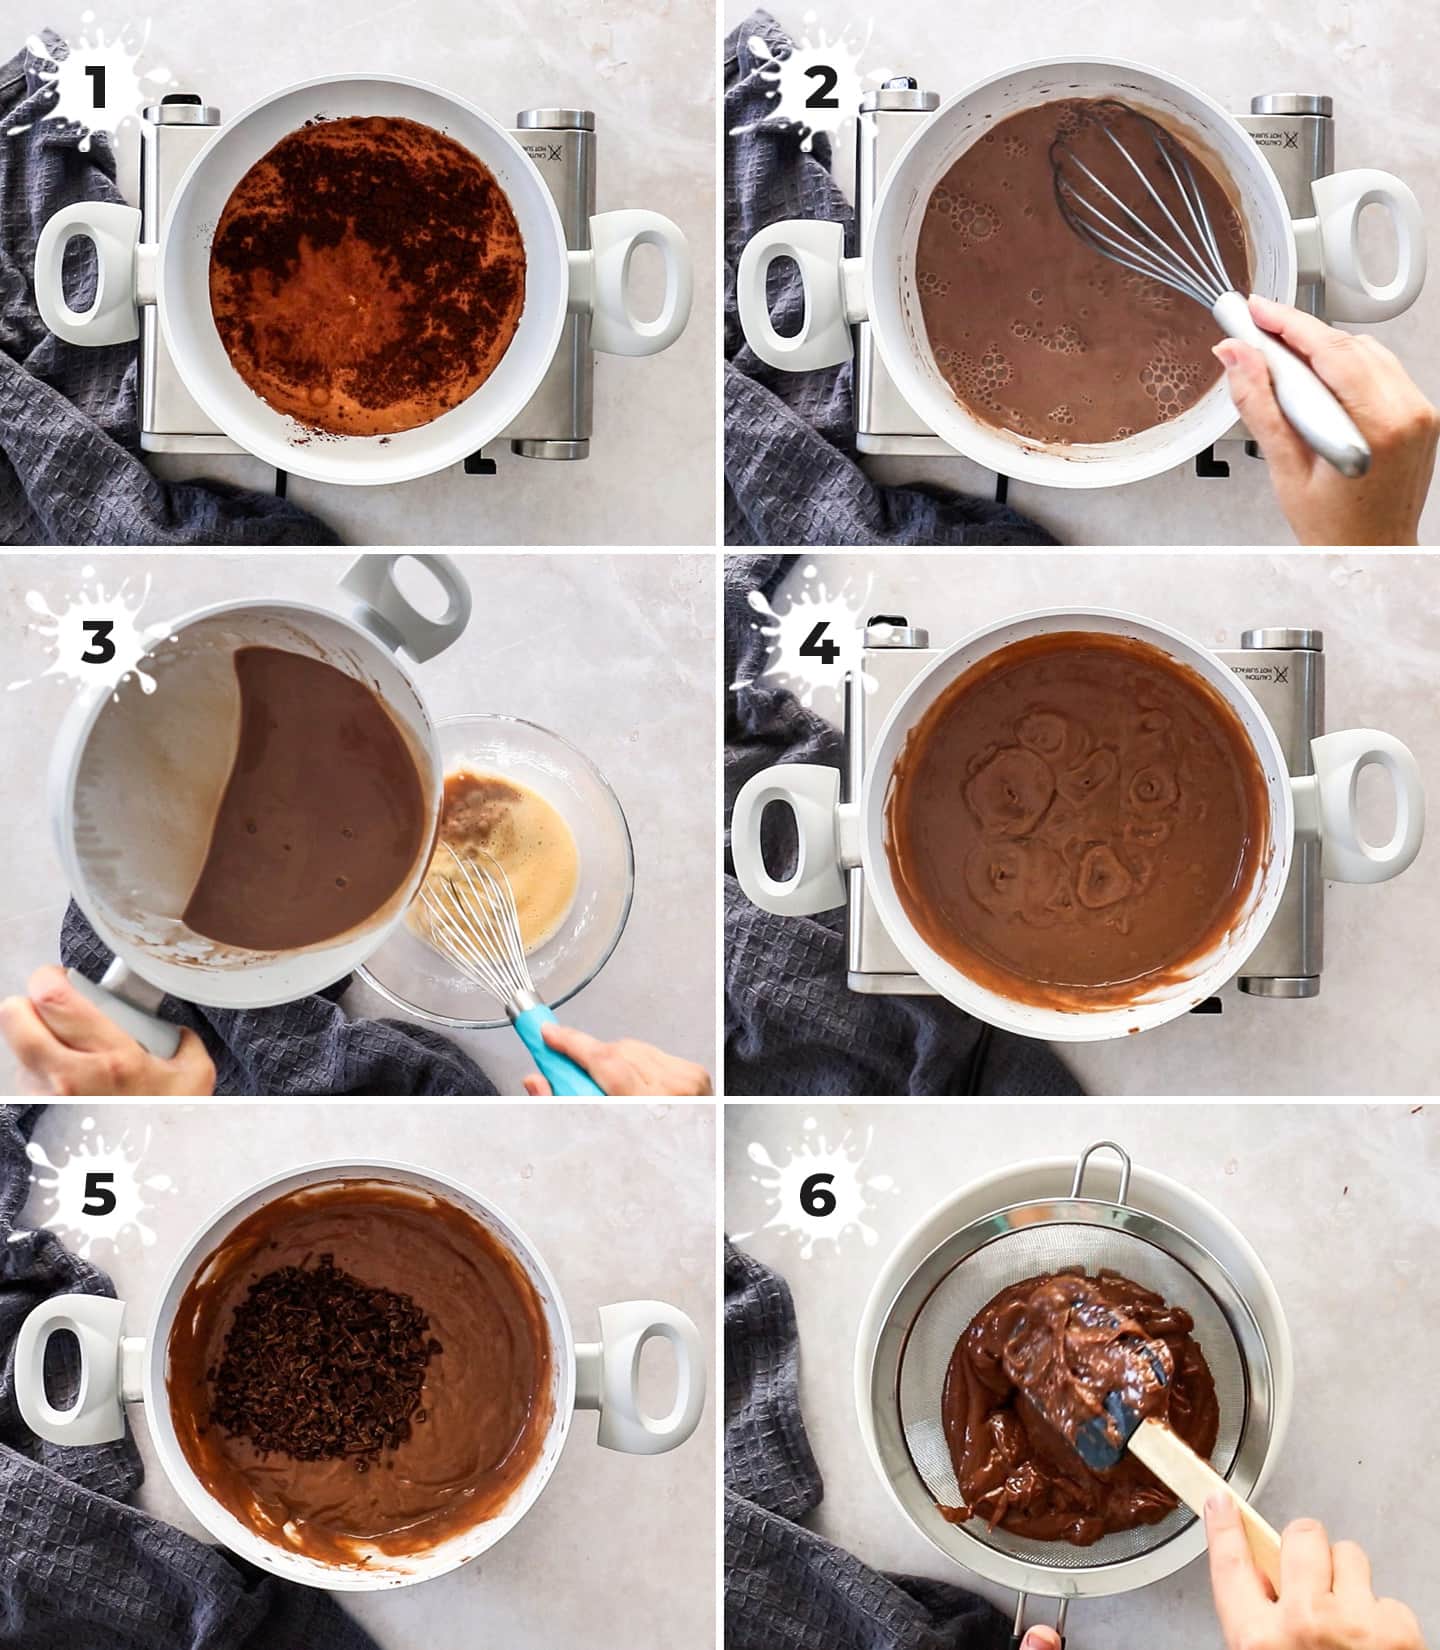 A collage of 6 images showing how to make chocolate pastry cream.